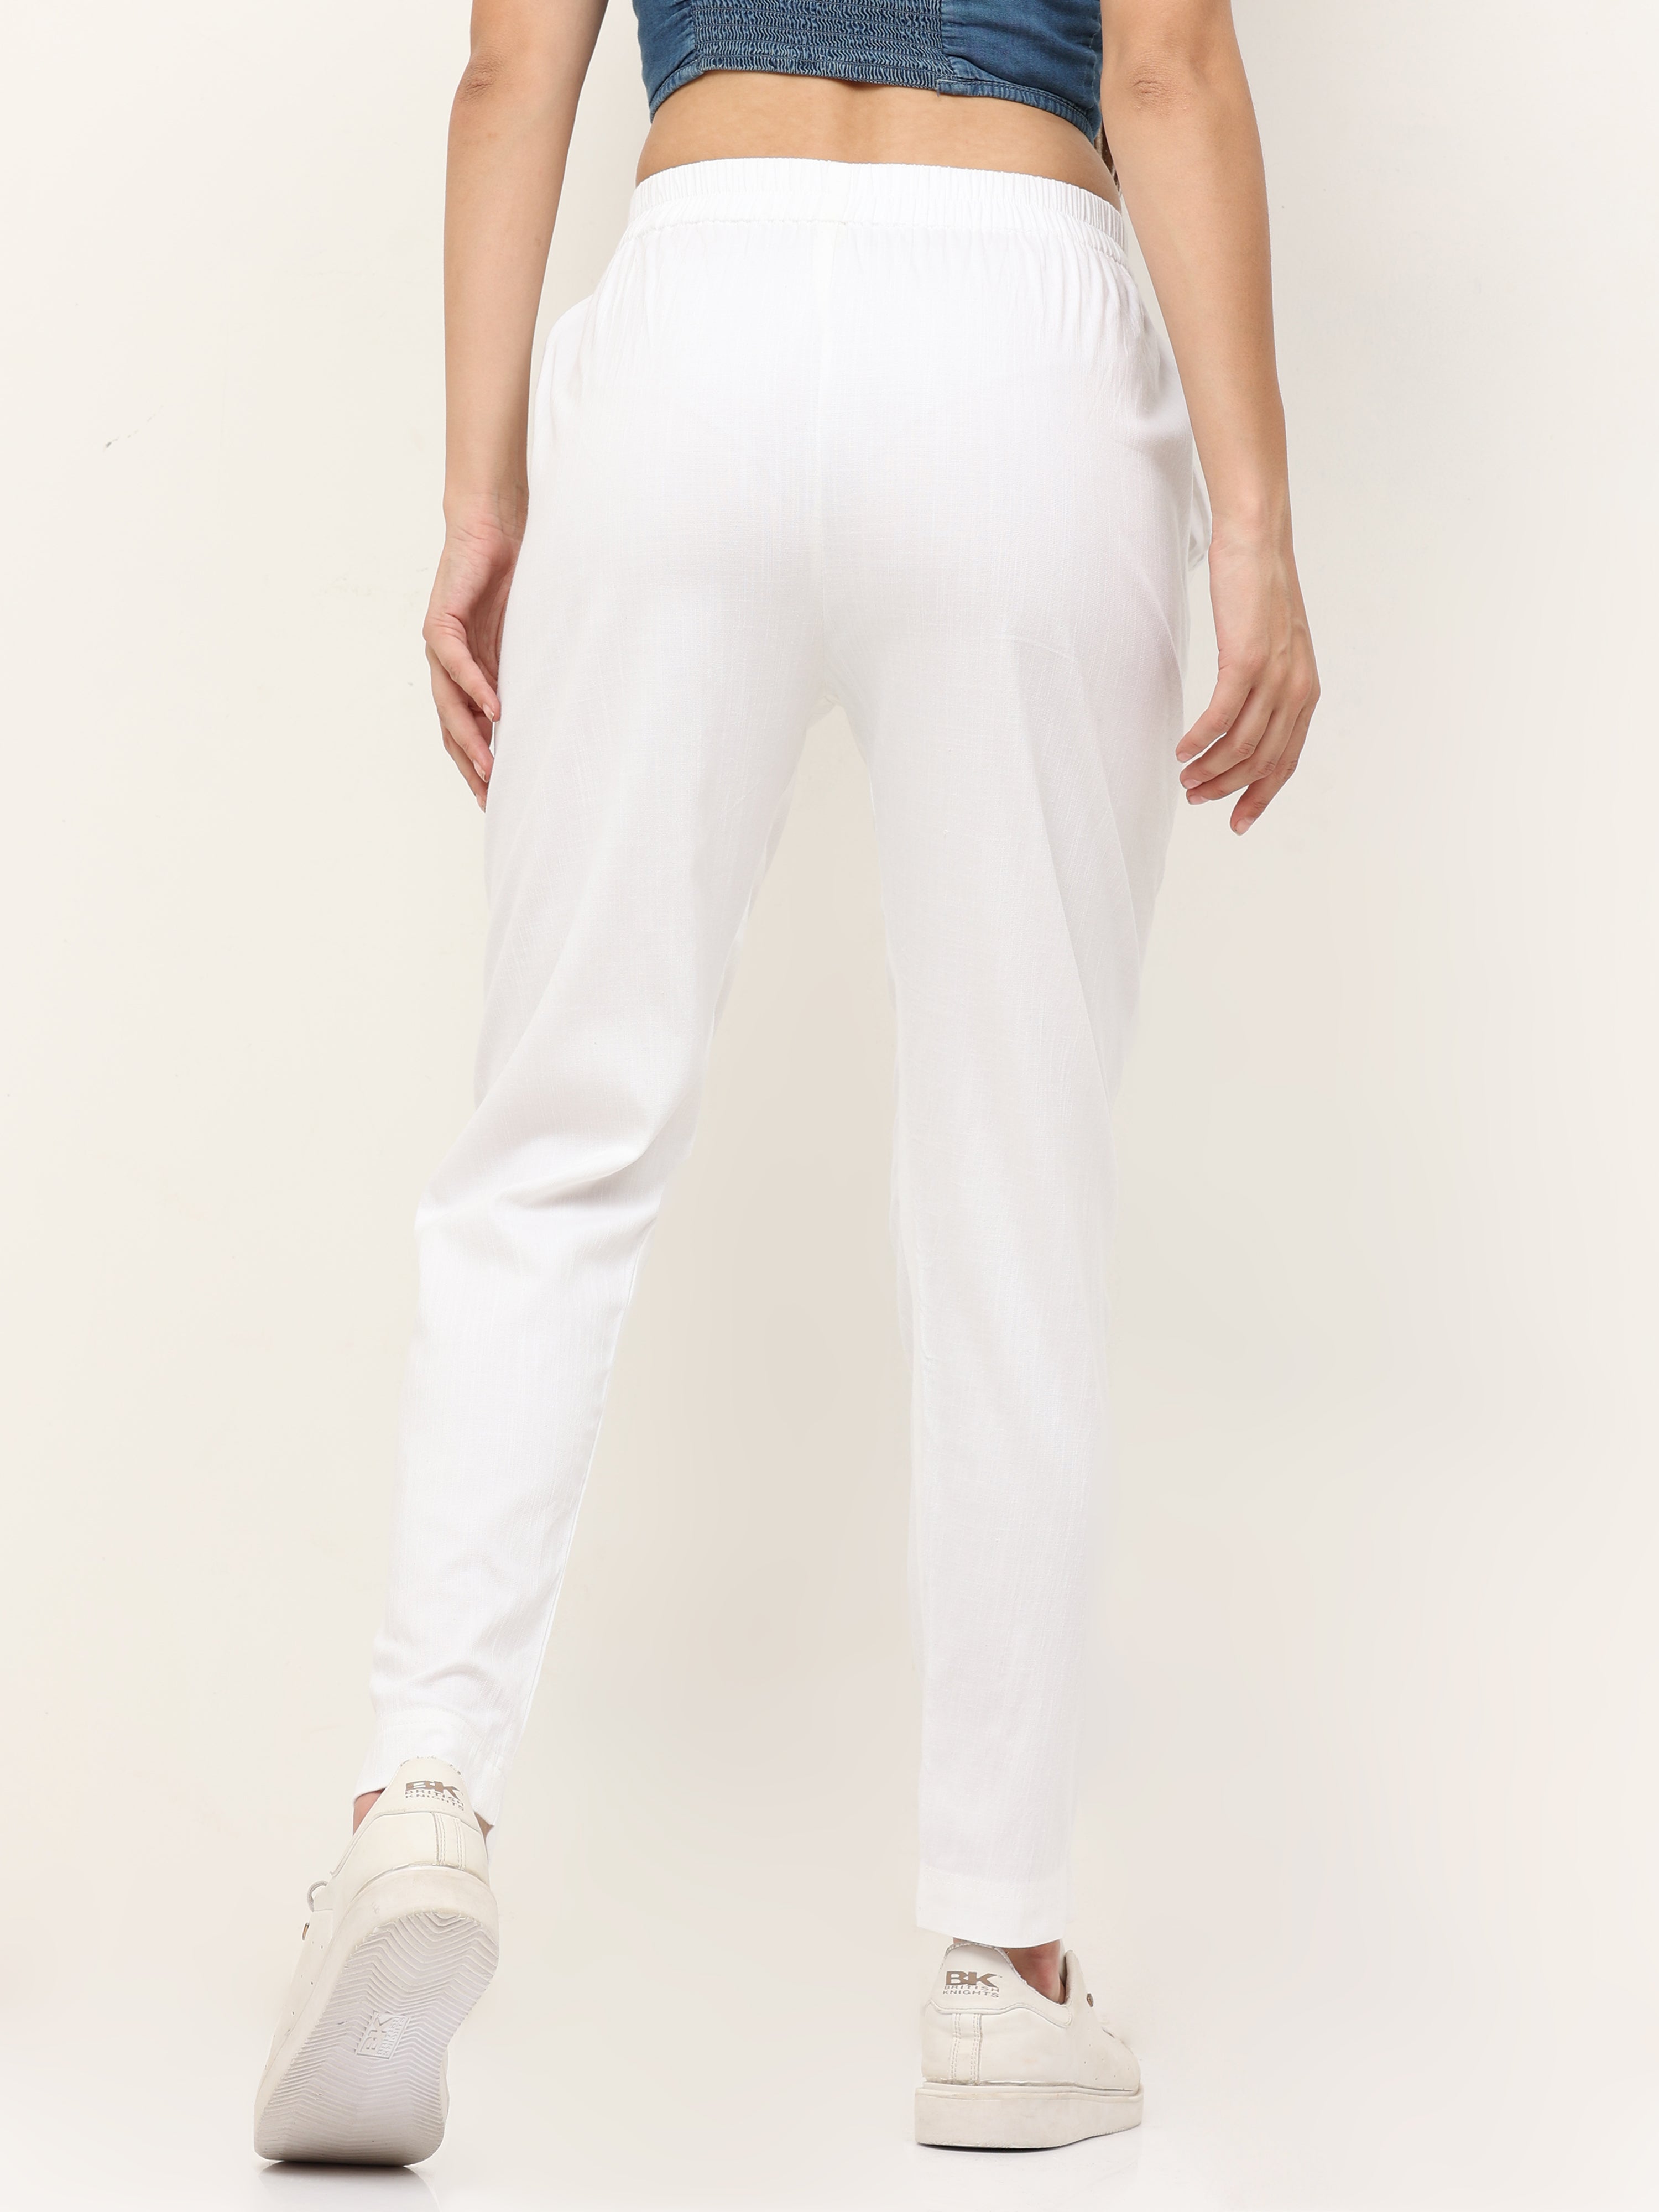 Buy Mens Super Combed Cotton Rich Slim Fit Joggers with Side Pockets   Cream Melange US90  Jockey India